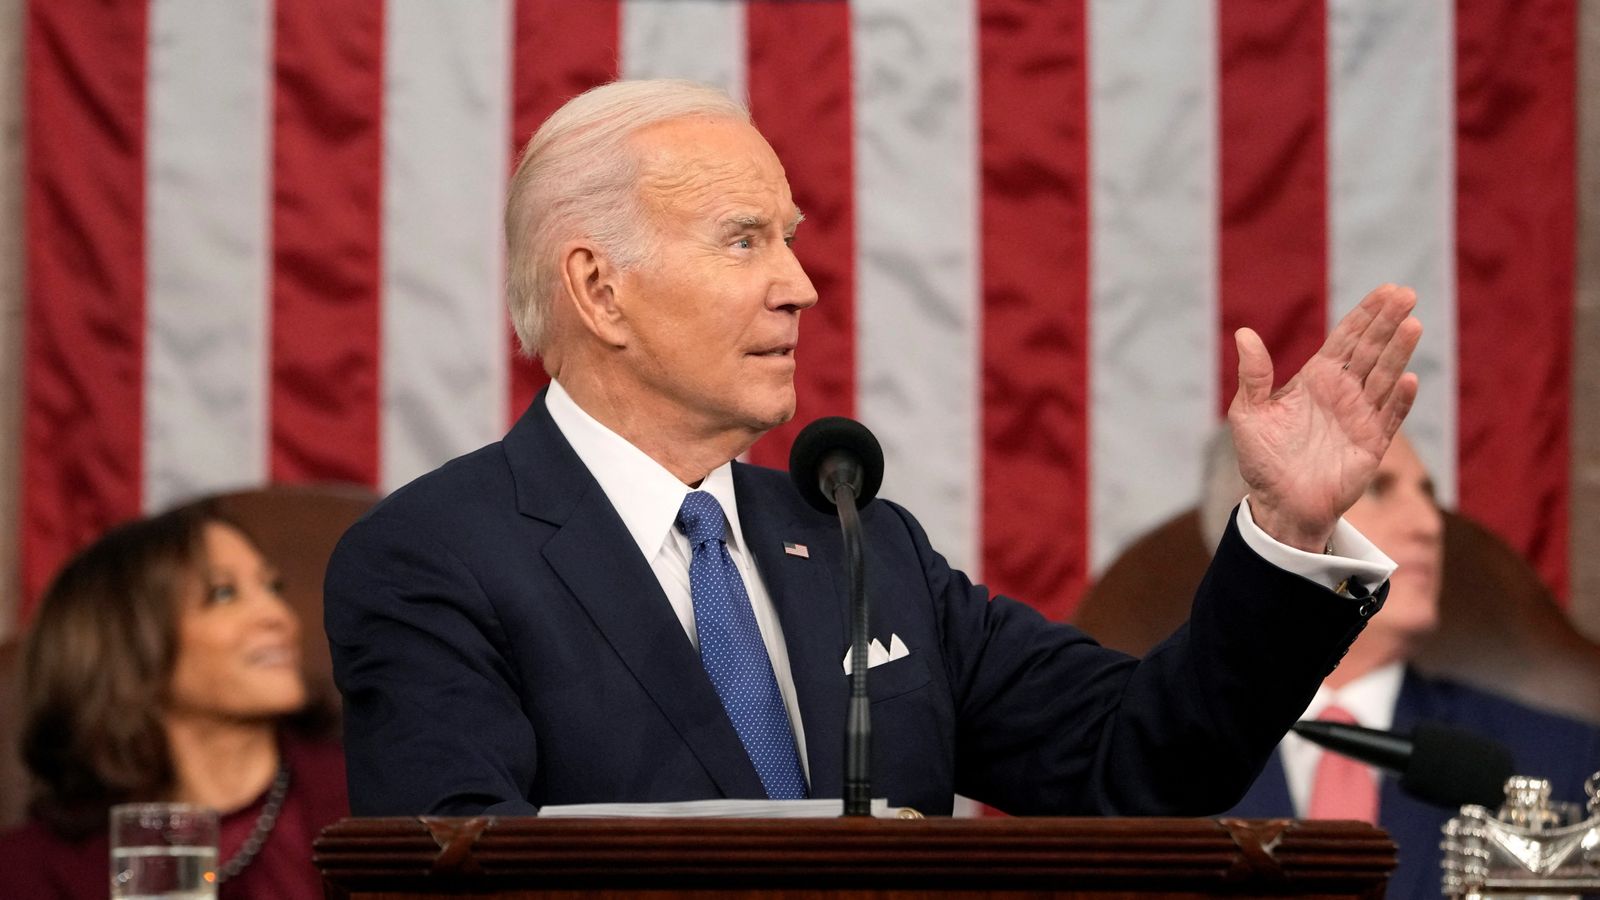 State of the Union: Joe Biden vows to work with Republicans - and says US democracy is bruised but unbroken